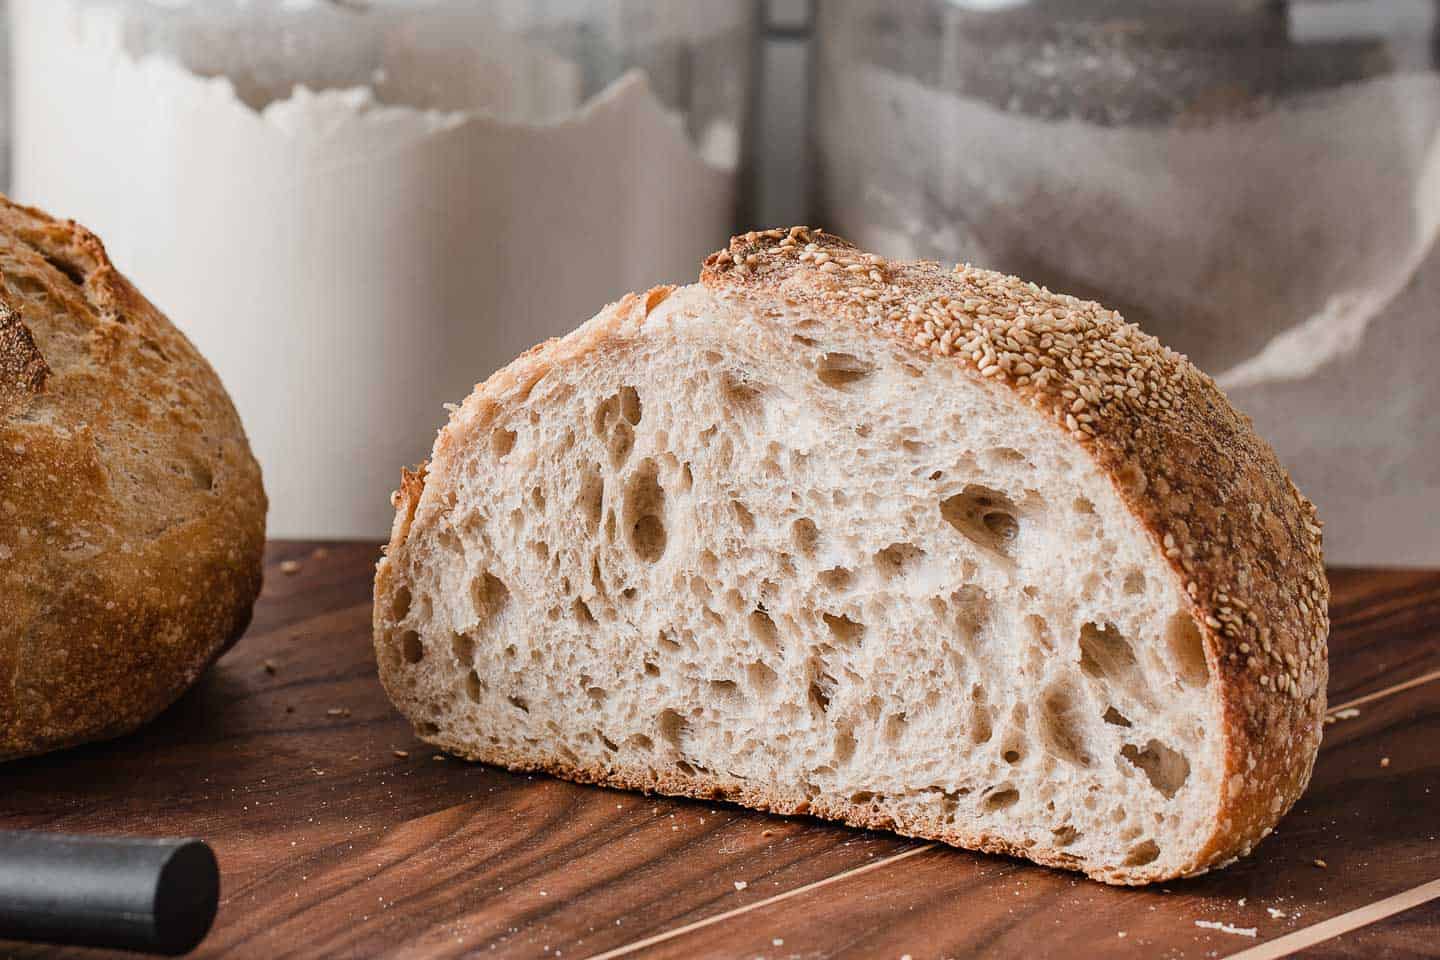 A loaf of bread cut in half to show the open crumb inside.